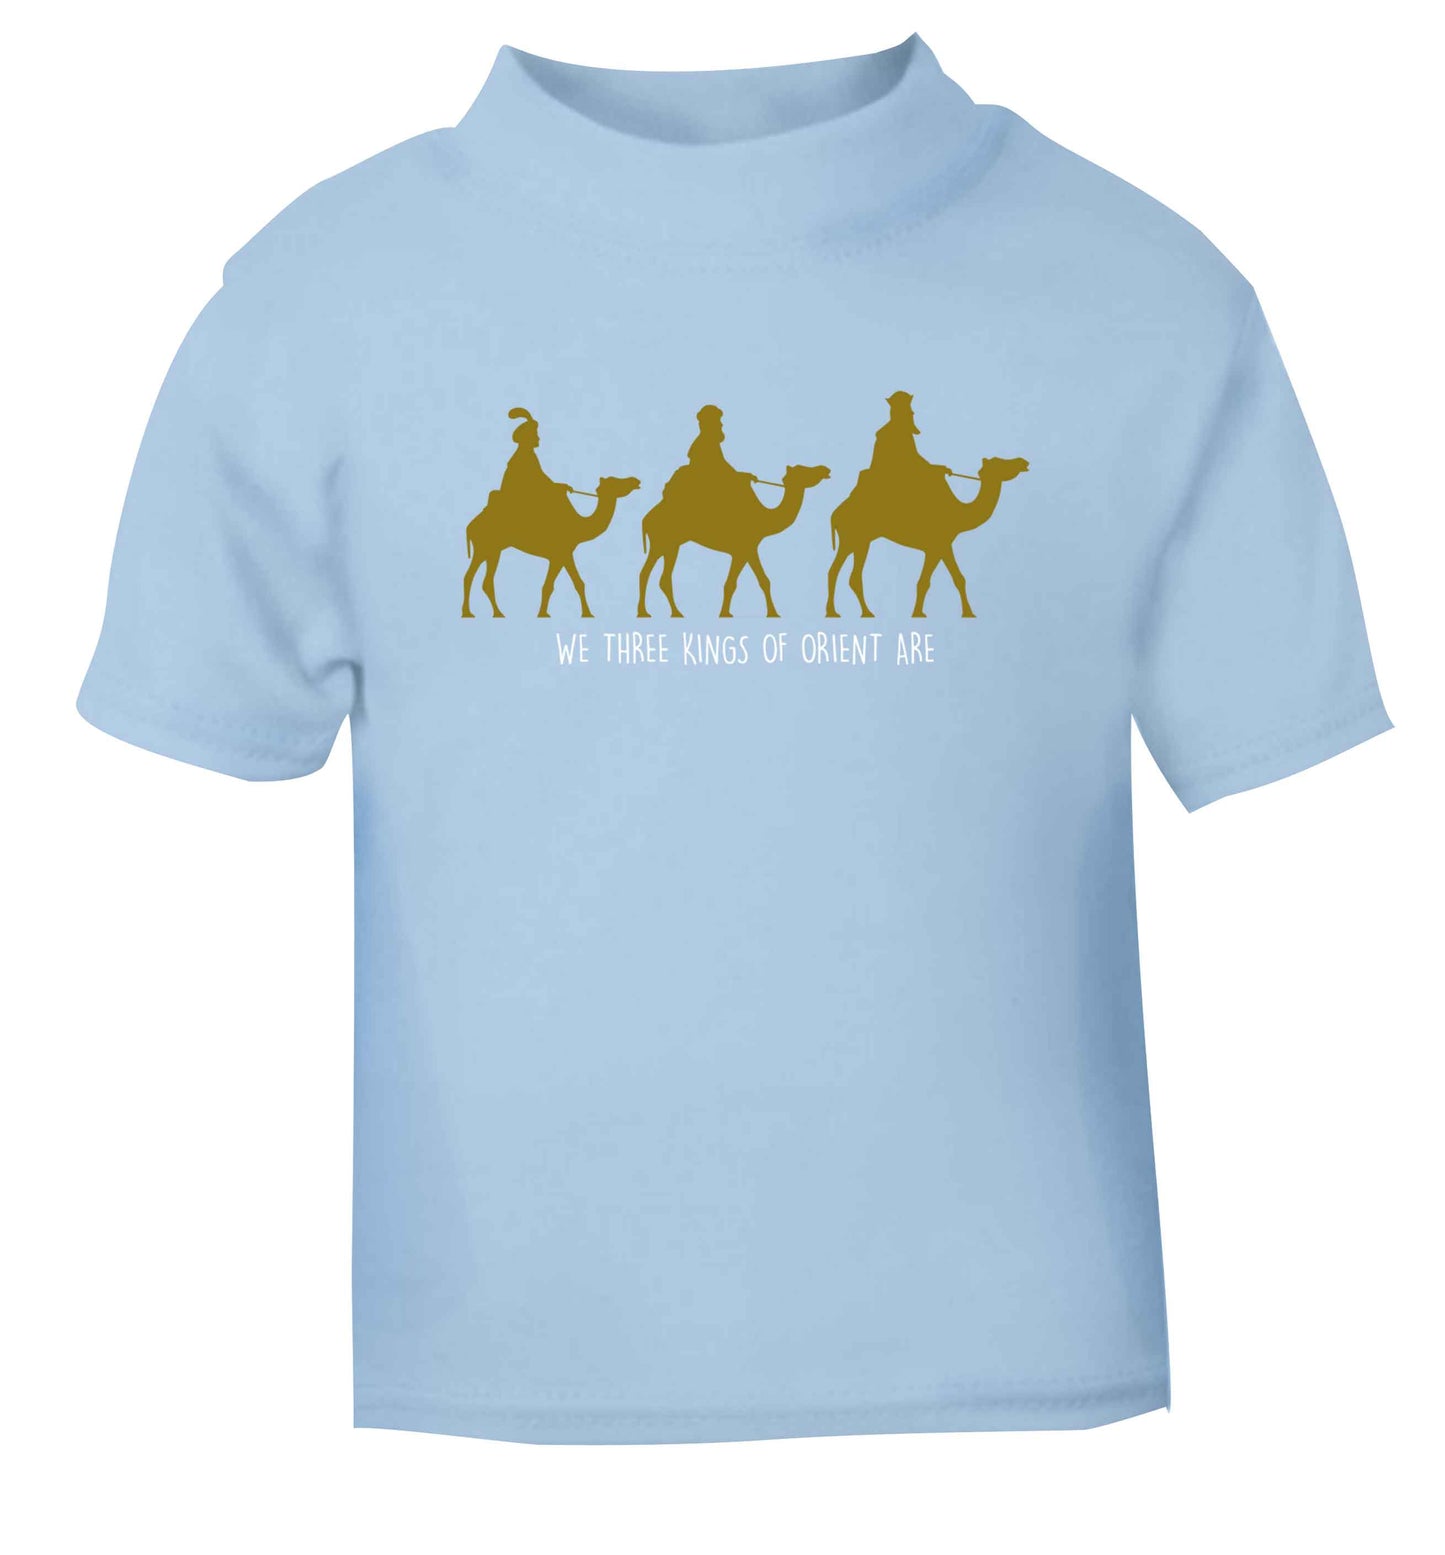 We three kings of orient are light blue baby toddler Tshirt 2 Years